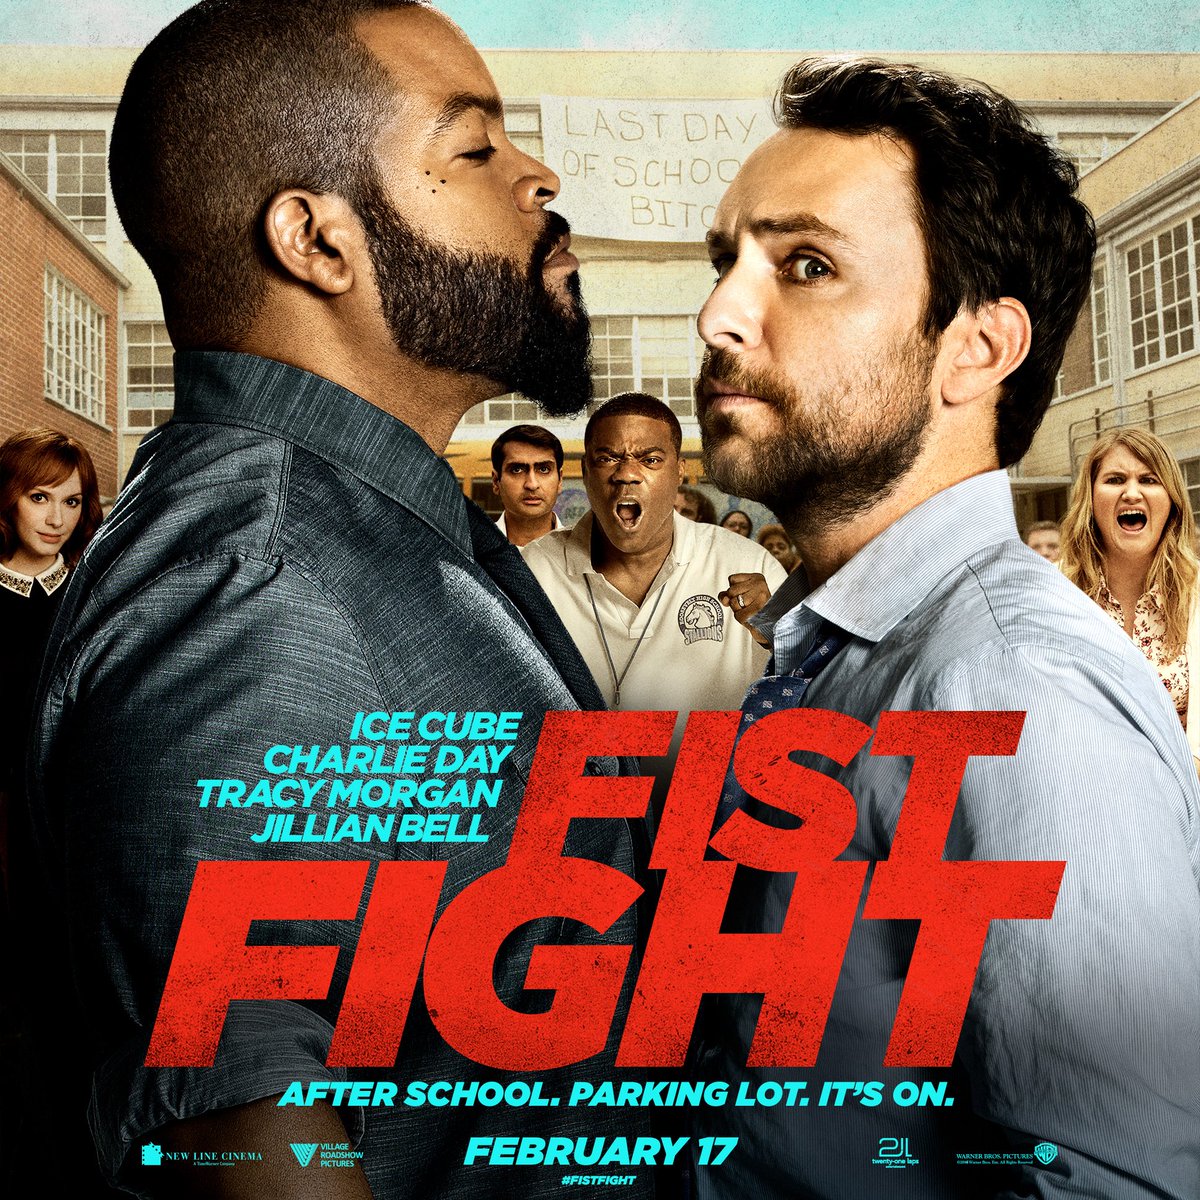 It's out! #FistFight in theaters everywhere. Get your tickets: https://t.co/1Zh5eNI1Wv https://t.co/tasjlGP2XP